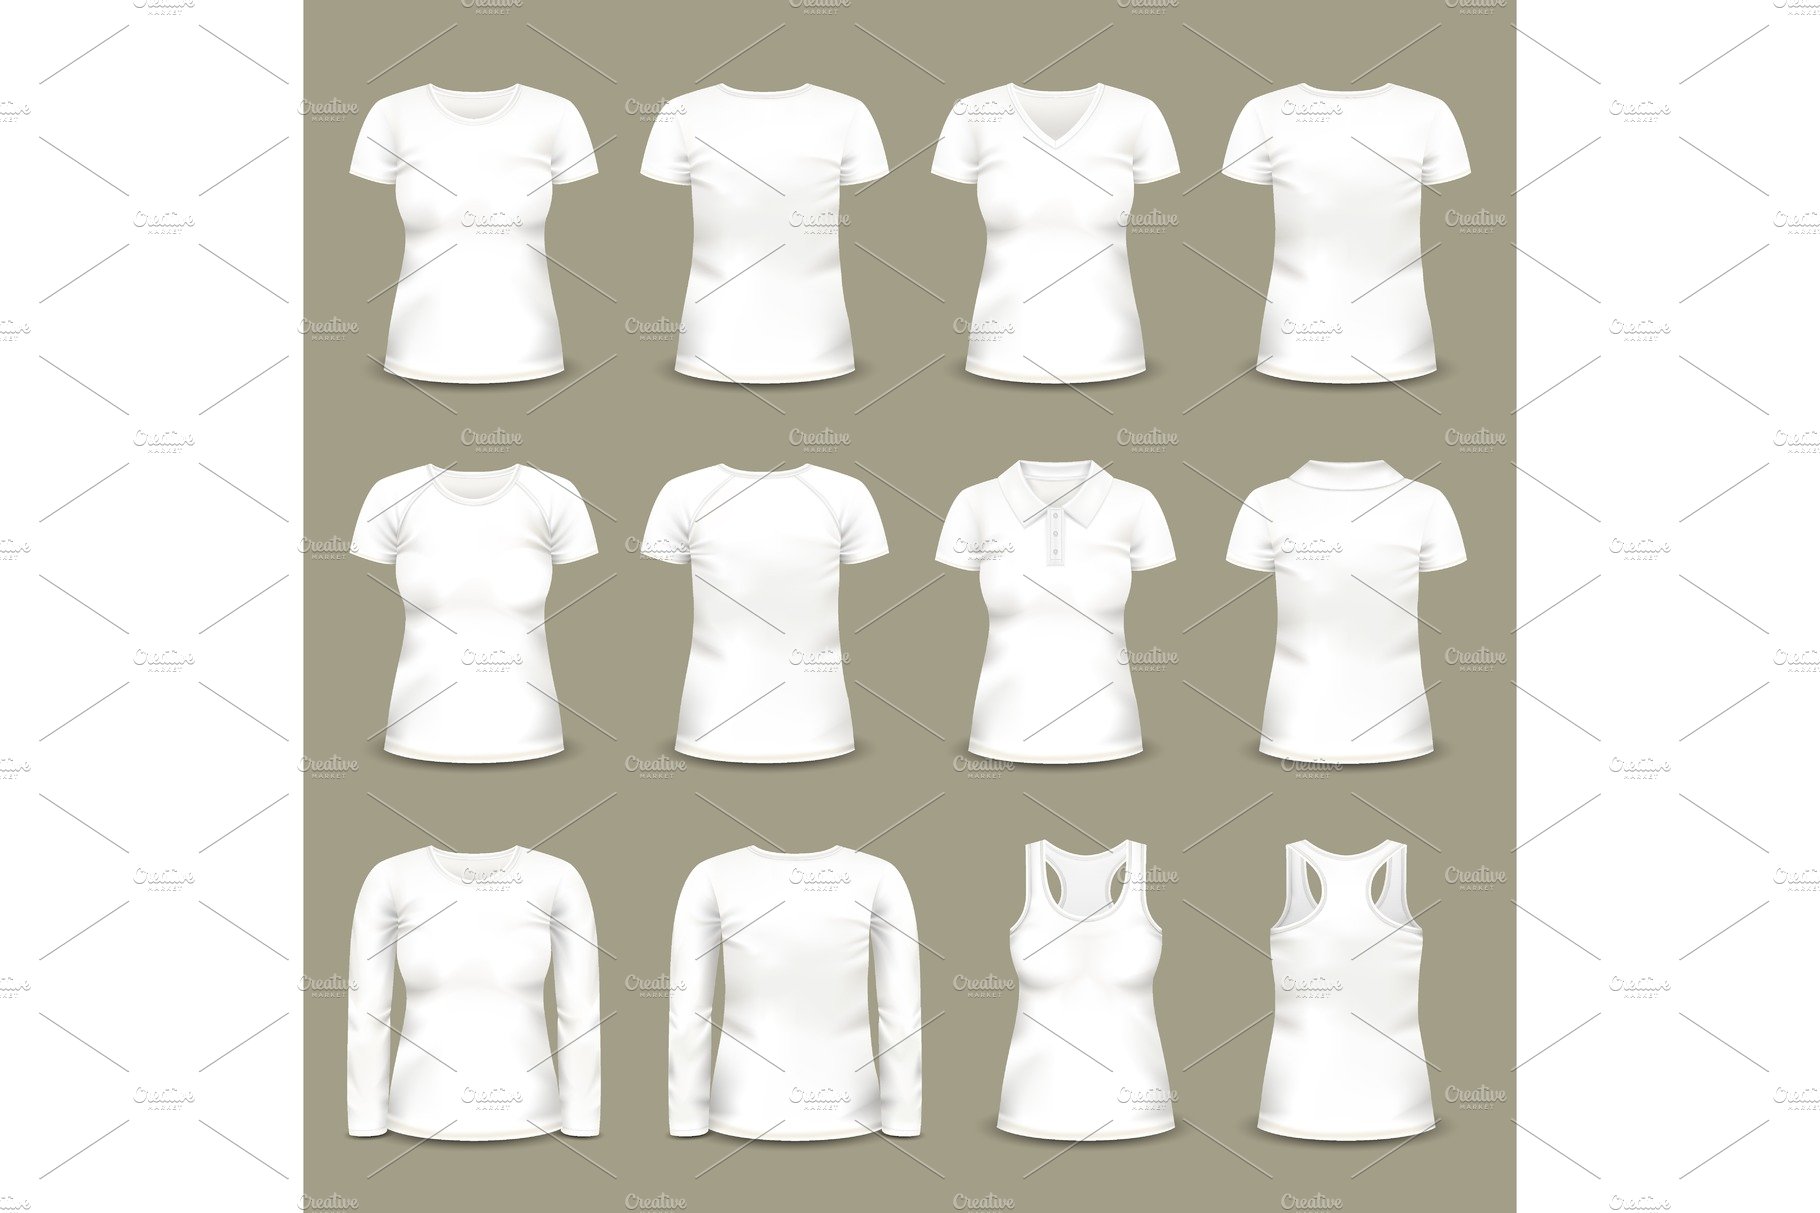 Set of isolated white woman shirts cover image.